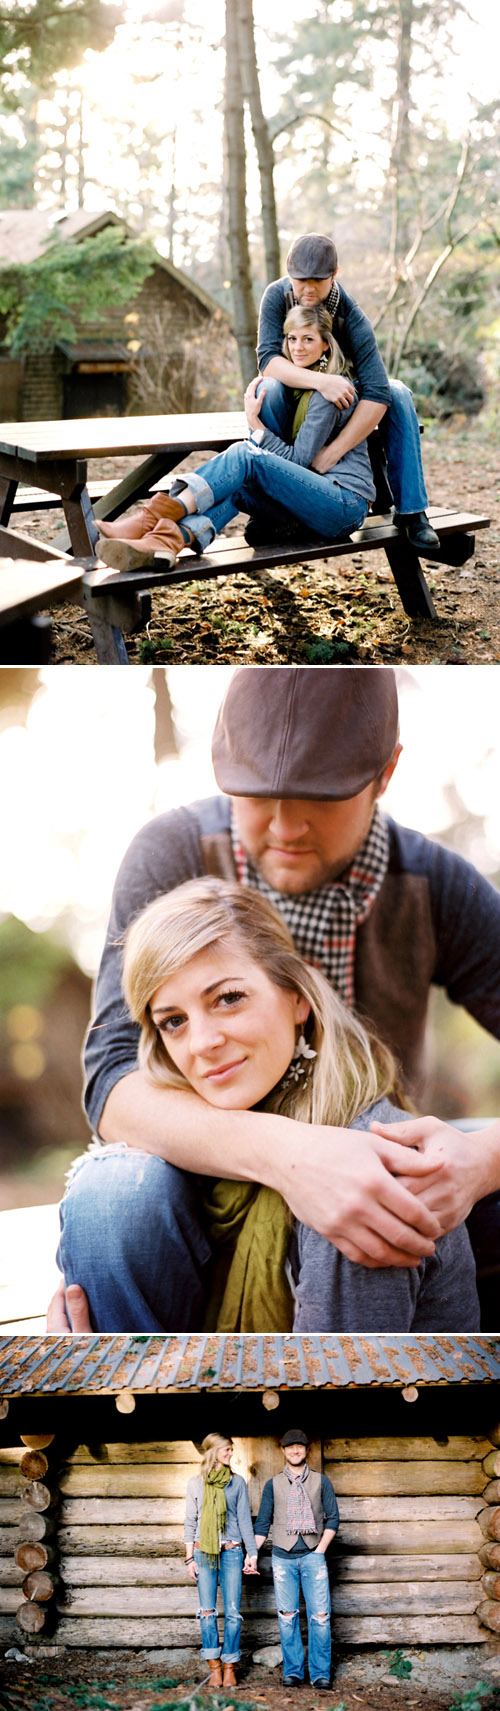 rustic and romantic Vancouver engagement photos shot at Lighthouse Park by Sherri Koop Photography